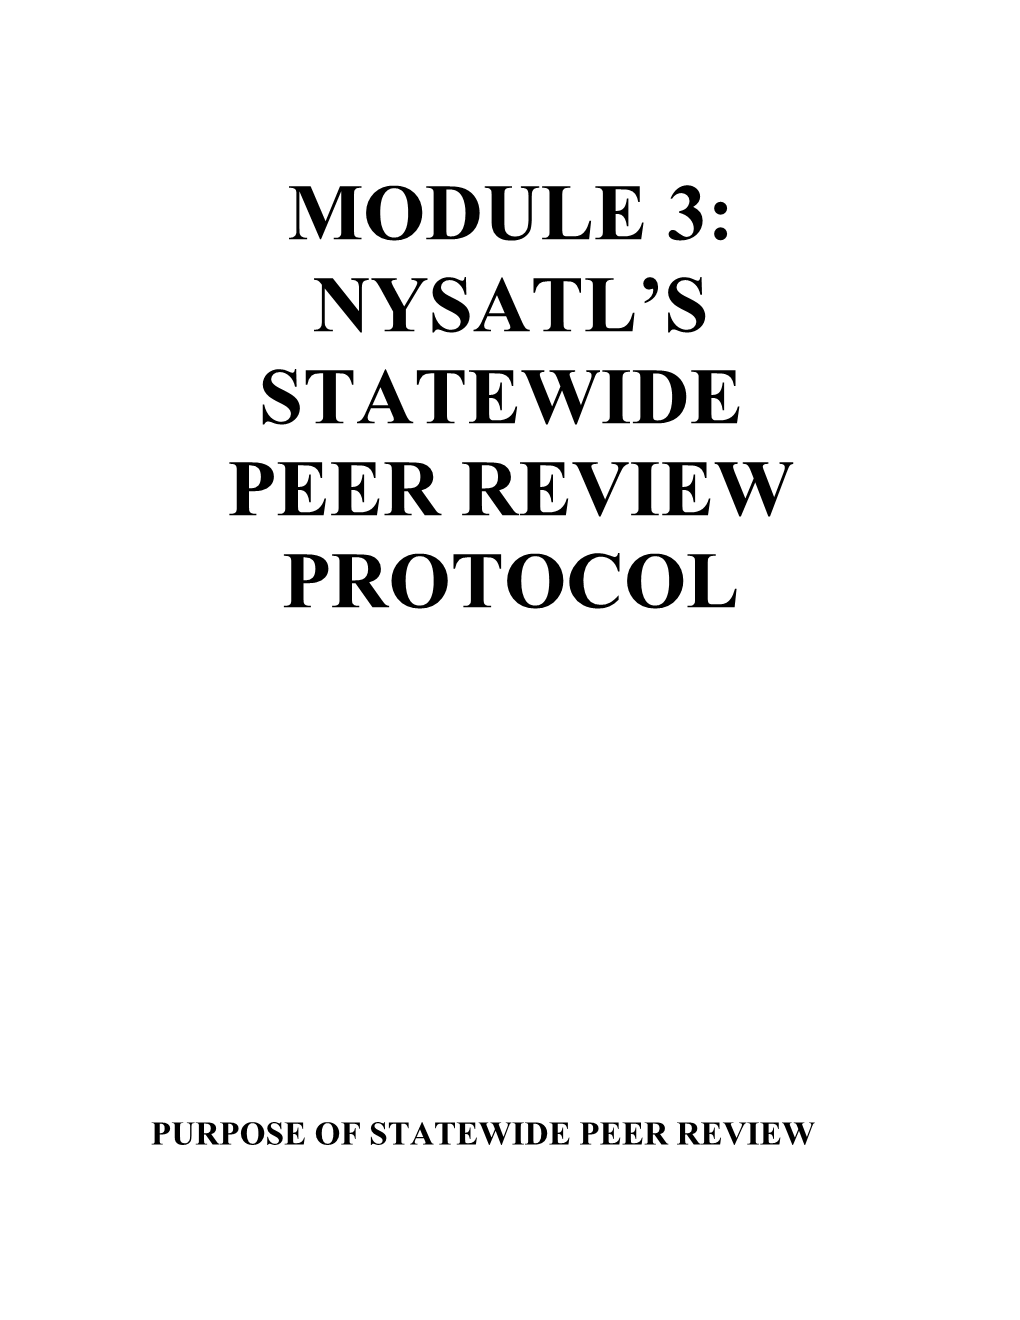 Purpose of Statewide Peer Review